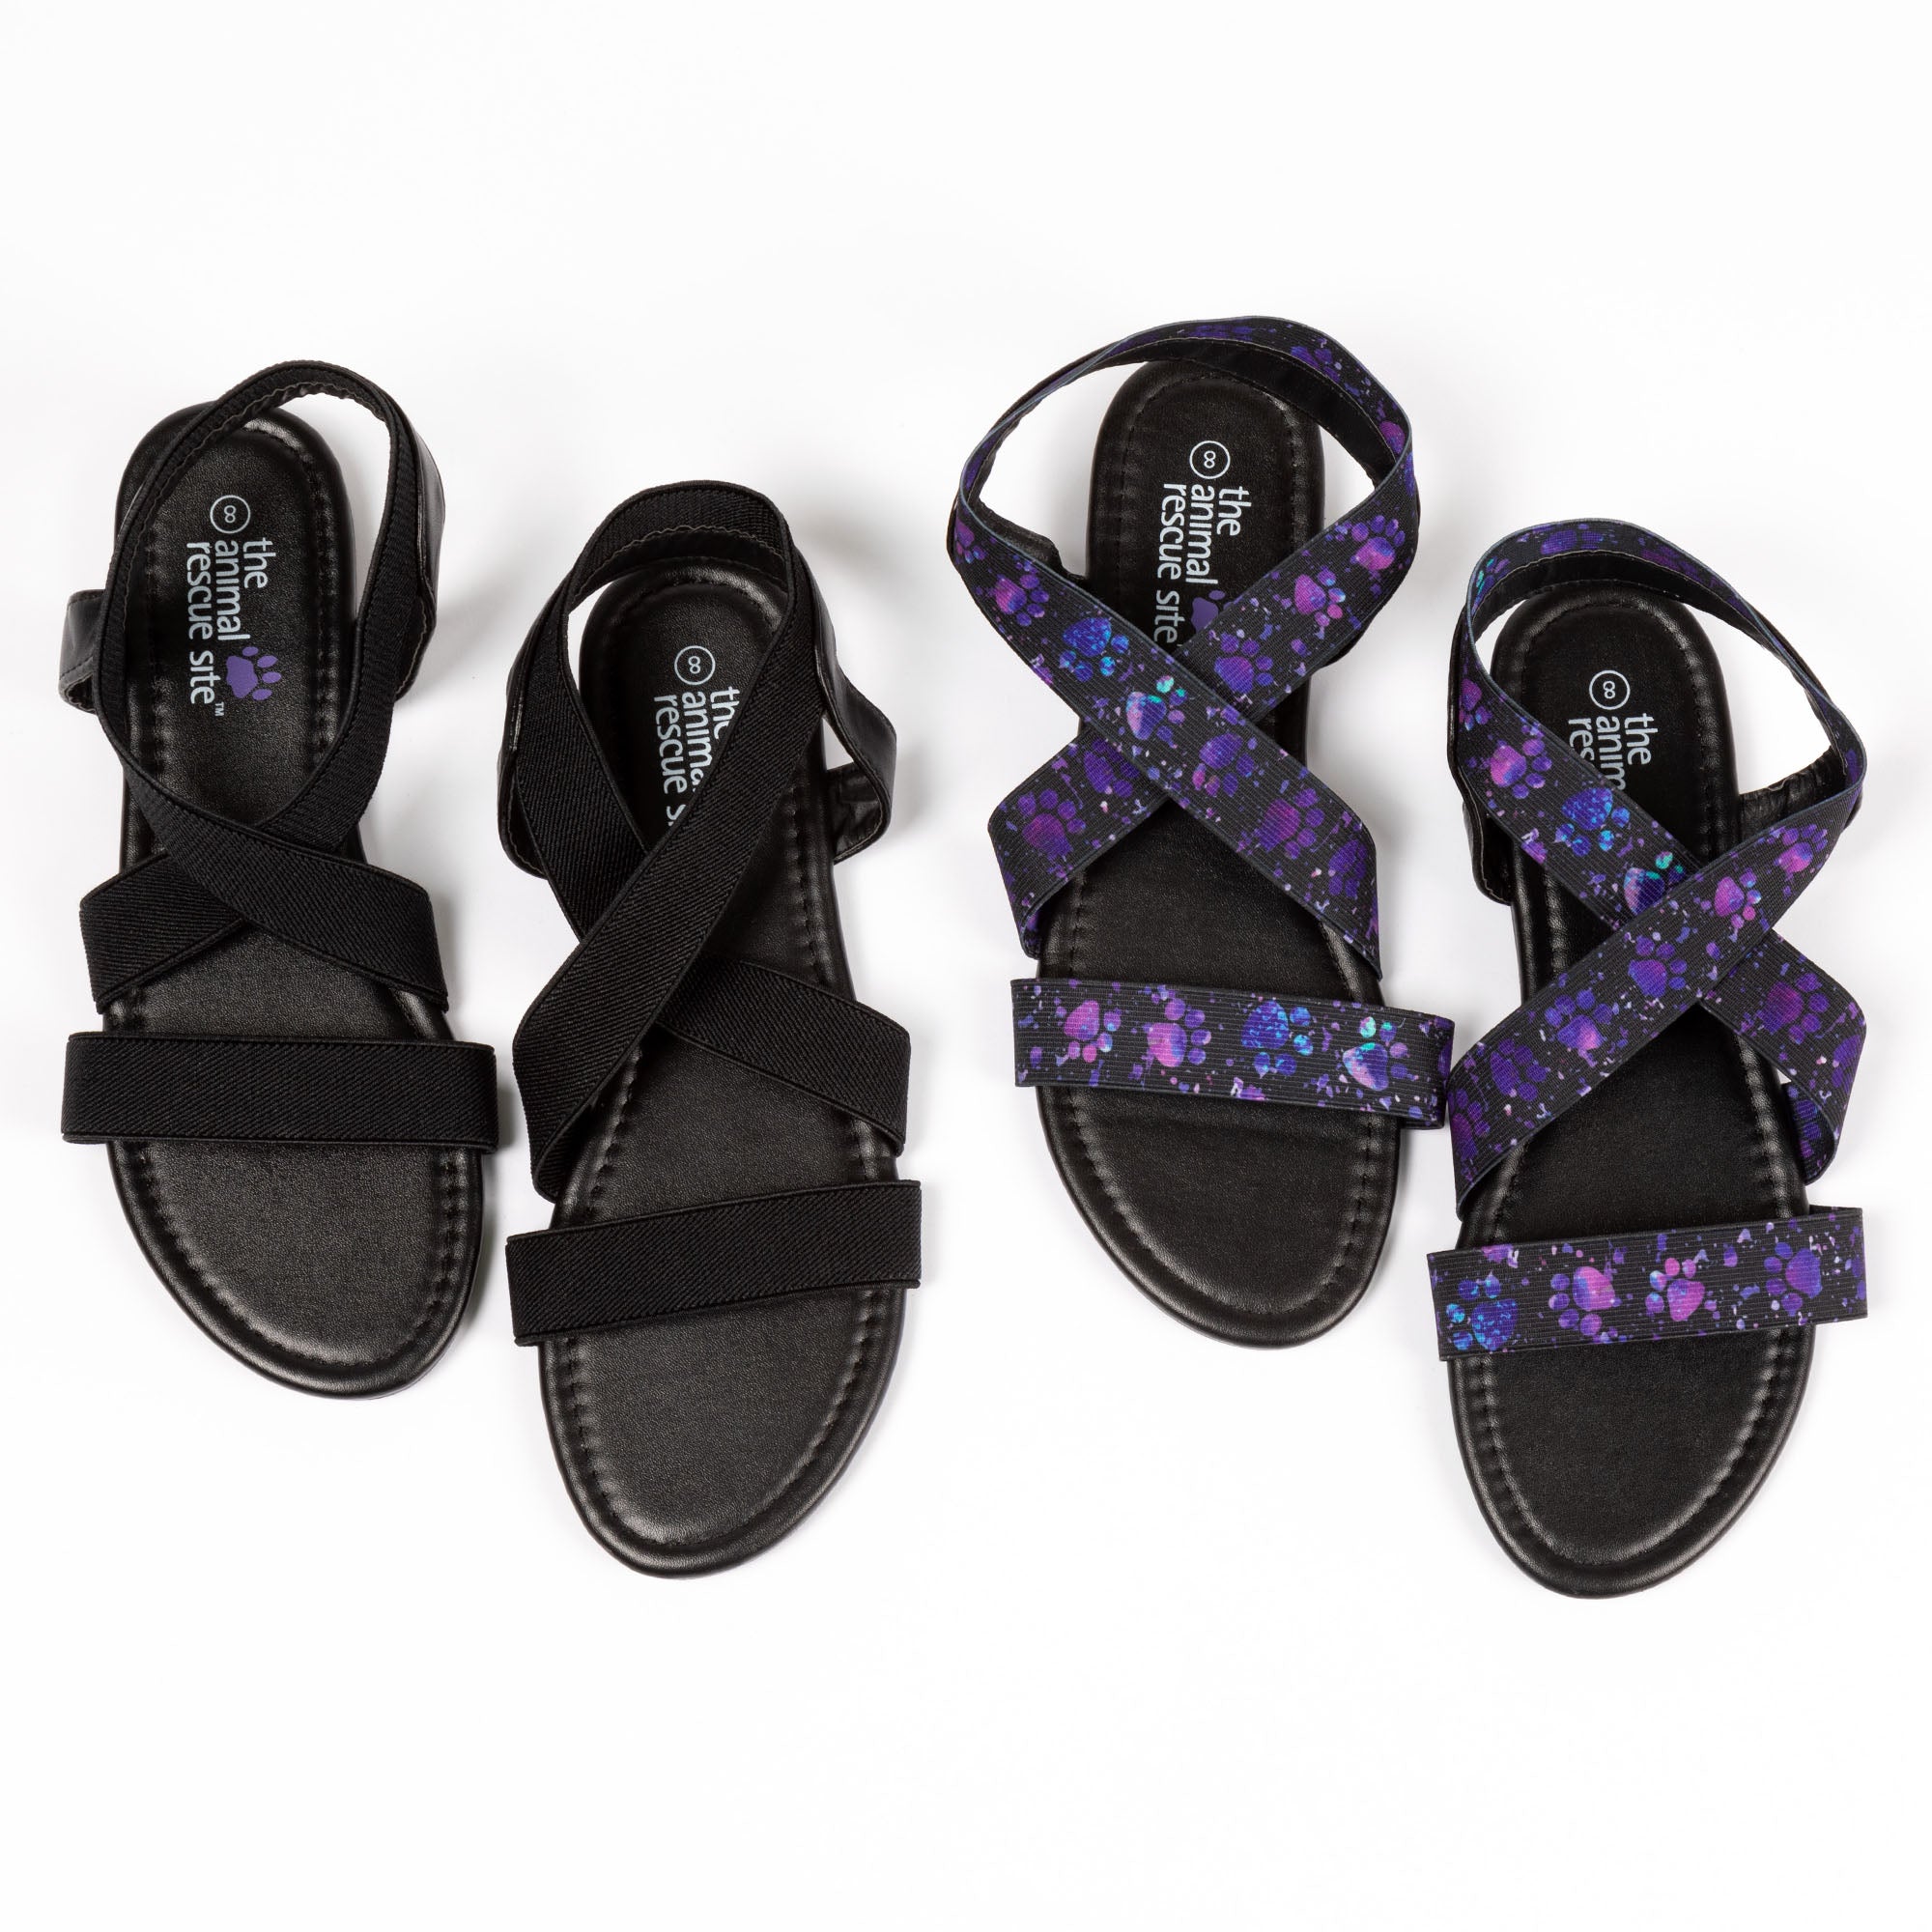 Pawsitively Stretchy Sandals - Painted Paws - 10